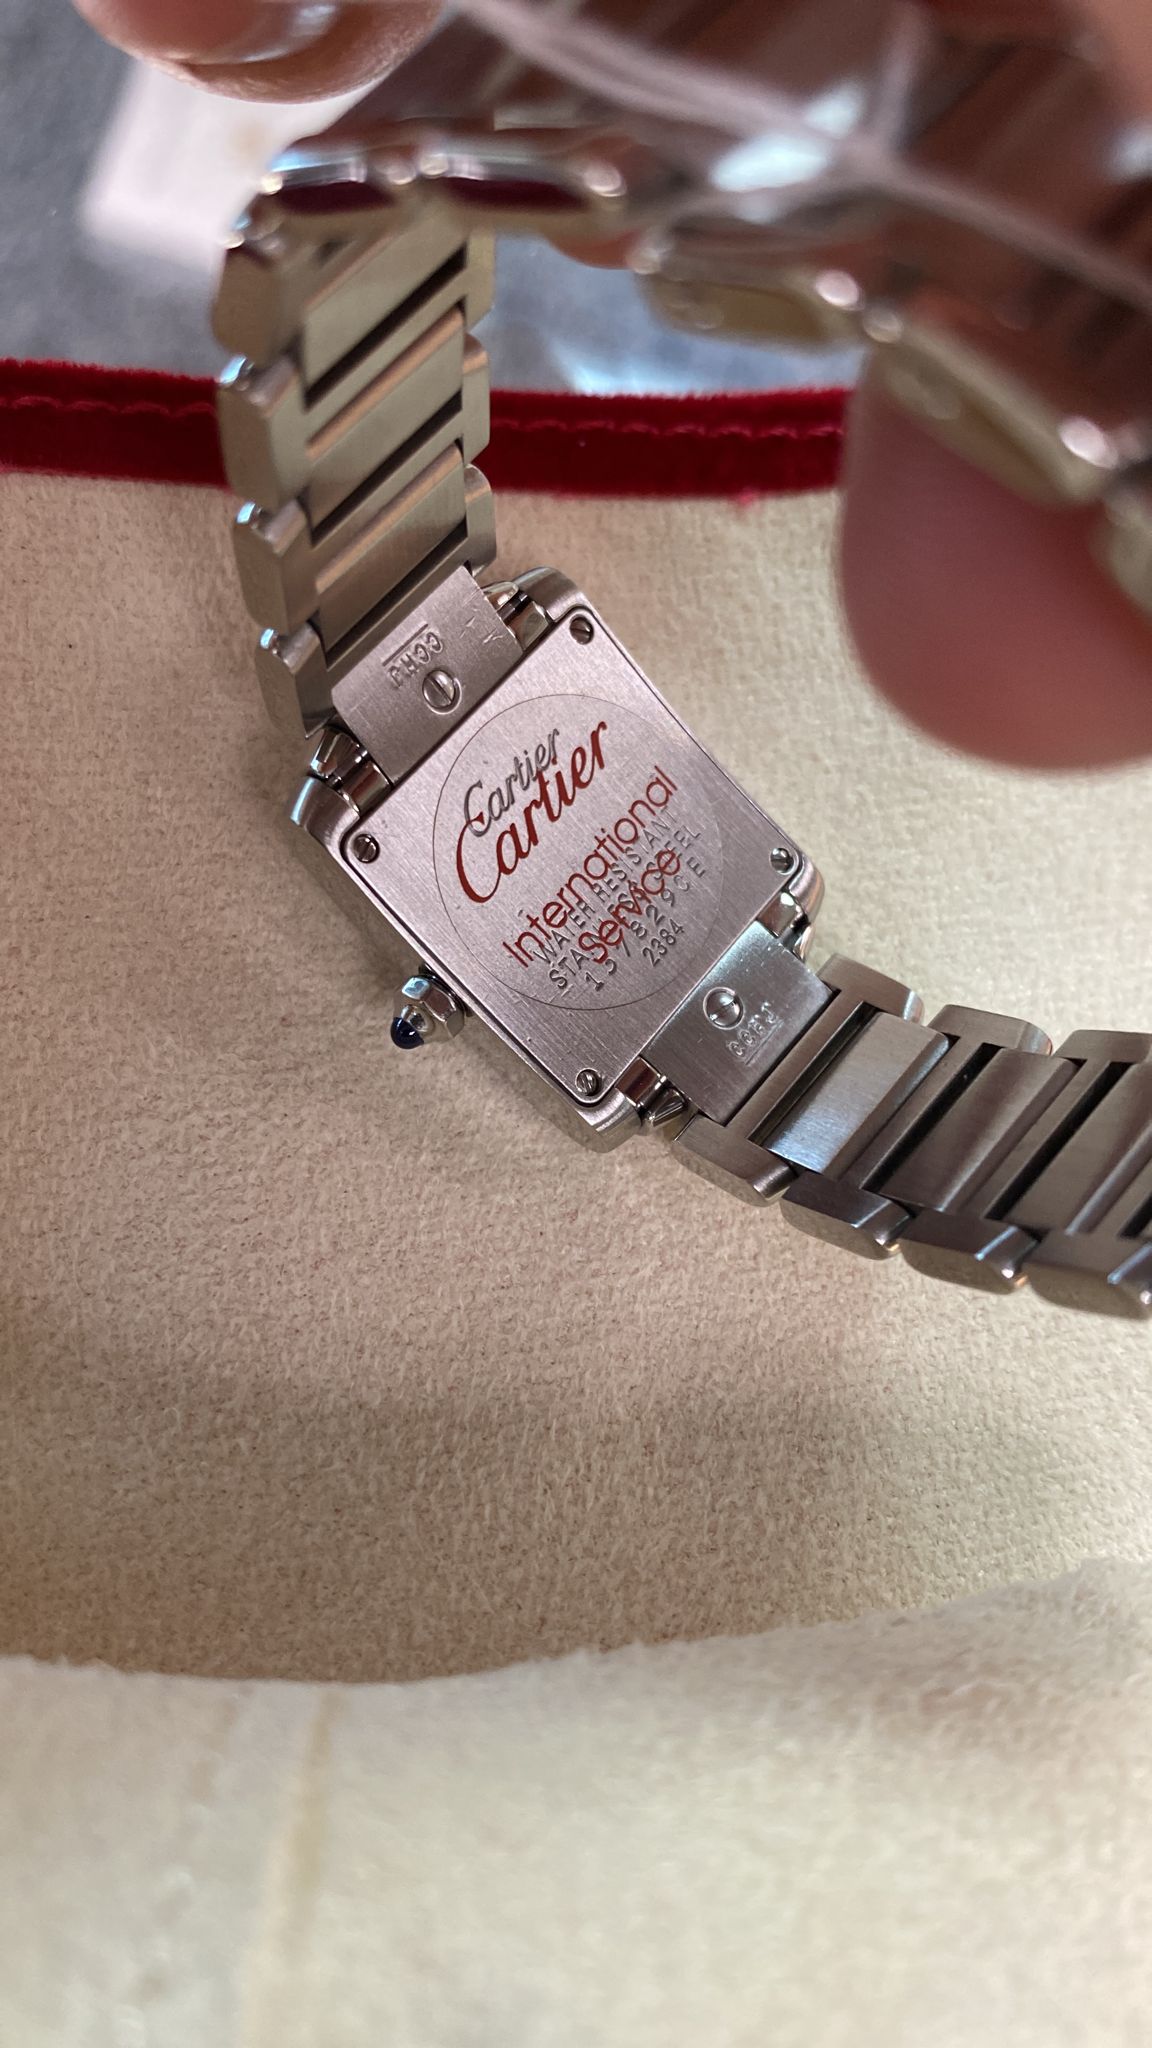 A CARTIER LADIES TANK FRANCAISE STAINLESS STEEL WATCH - Image 6 of 7